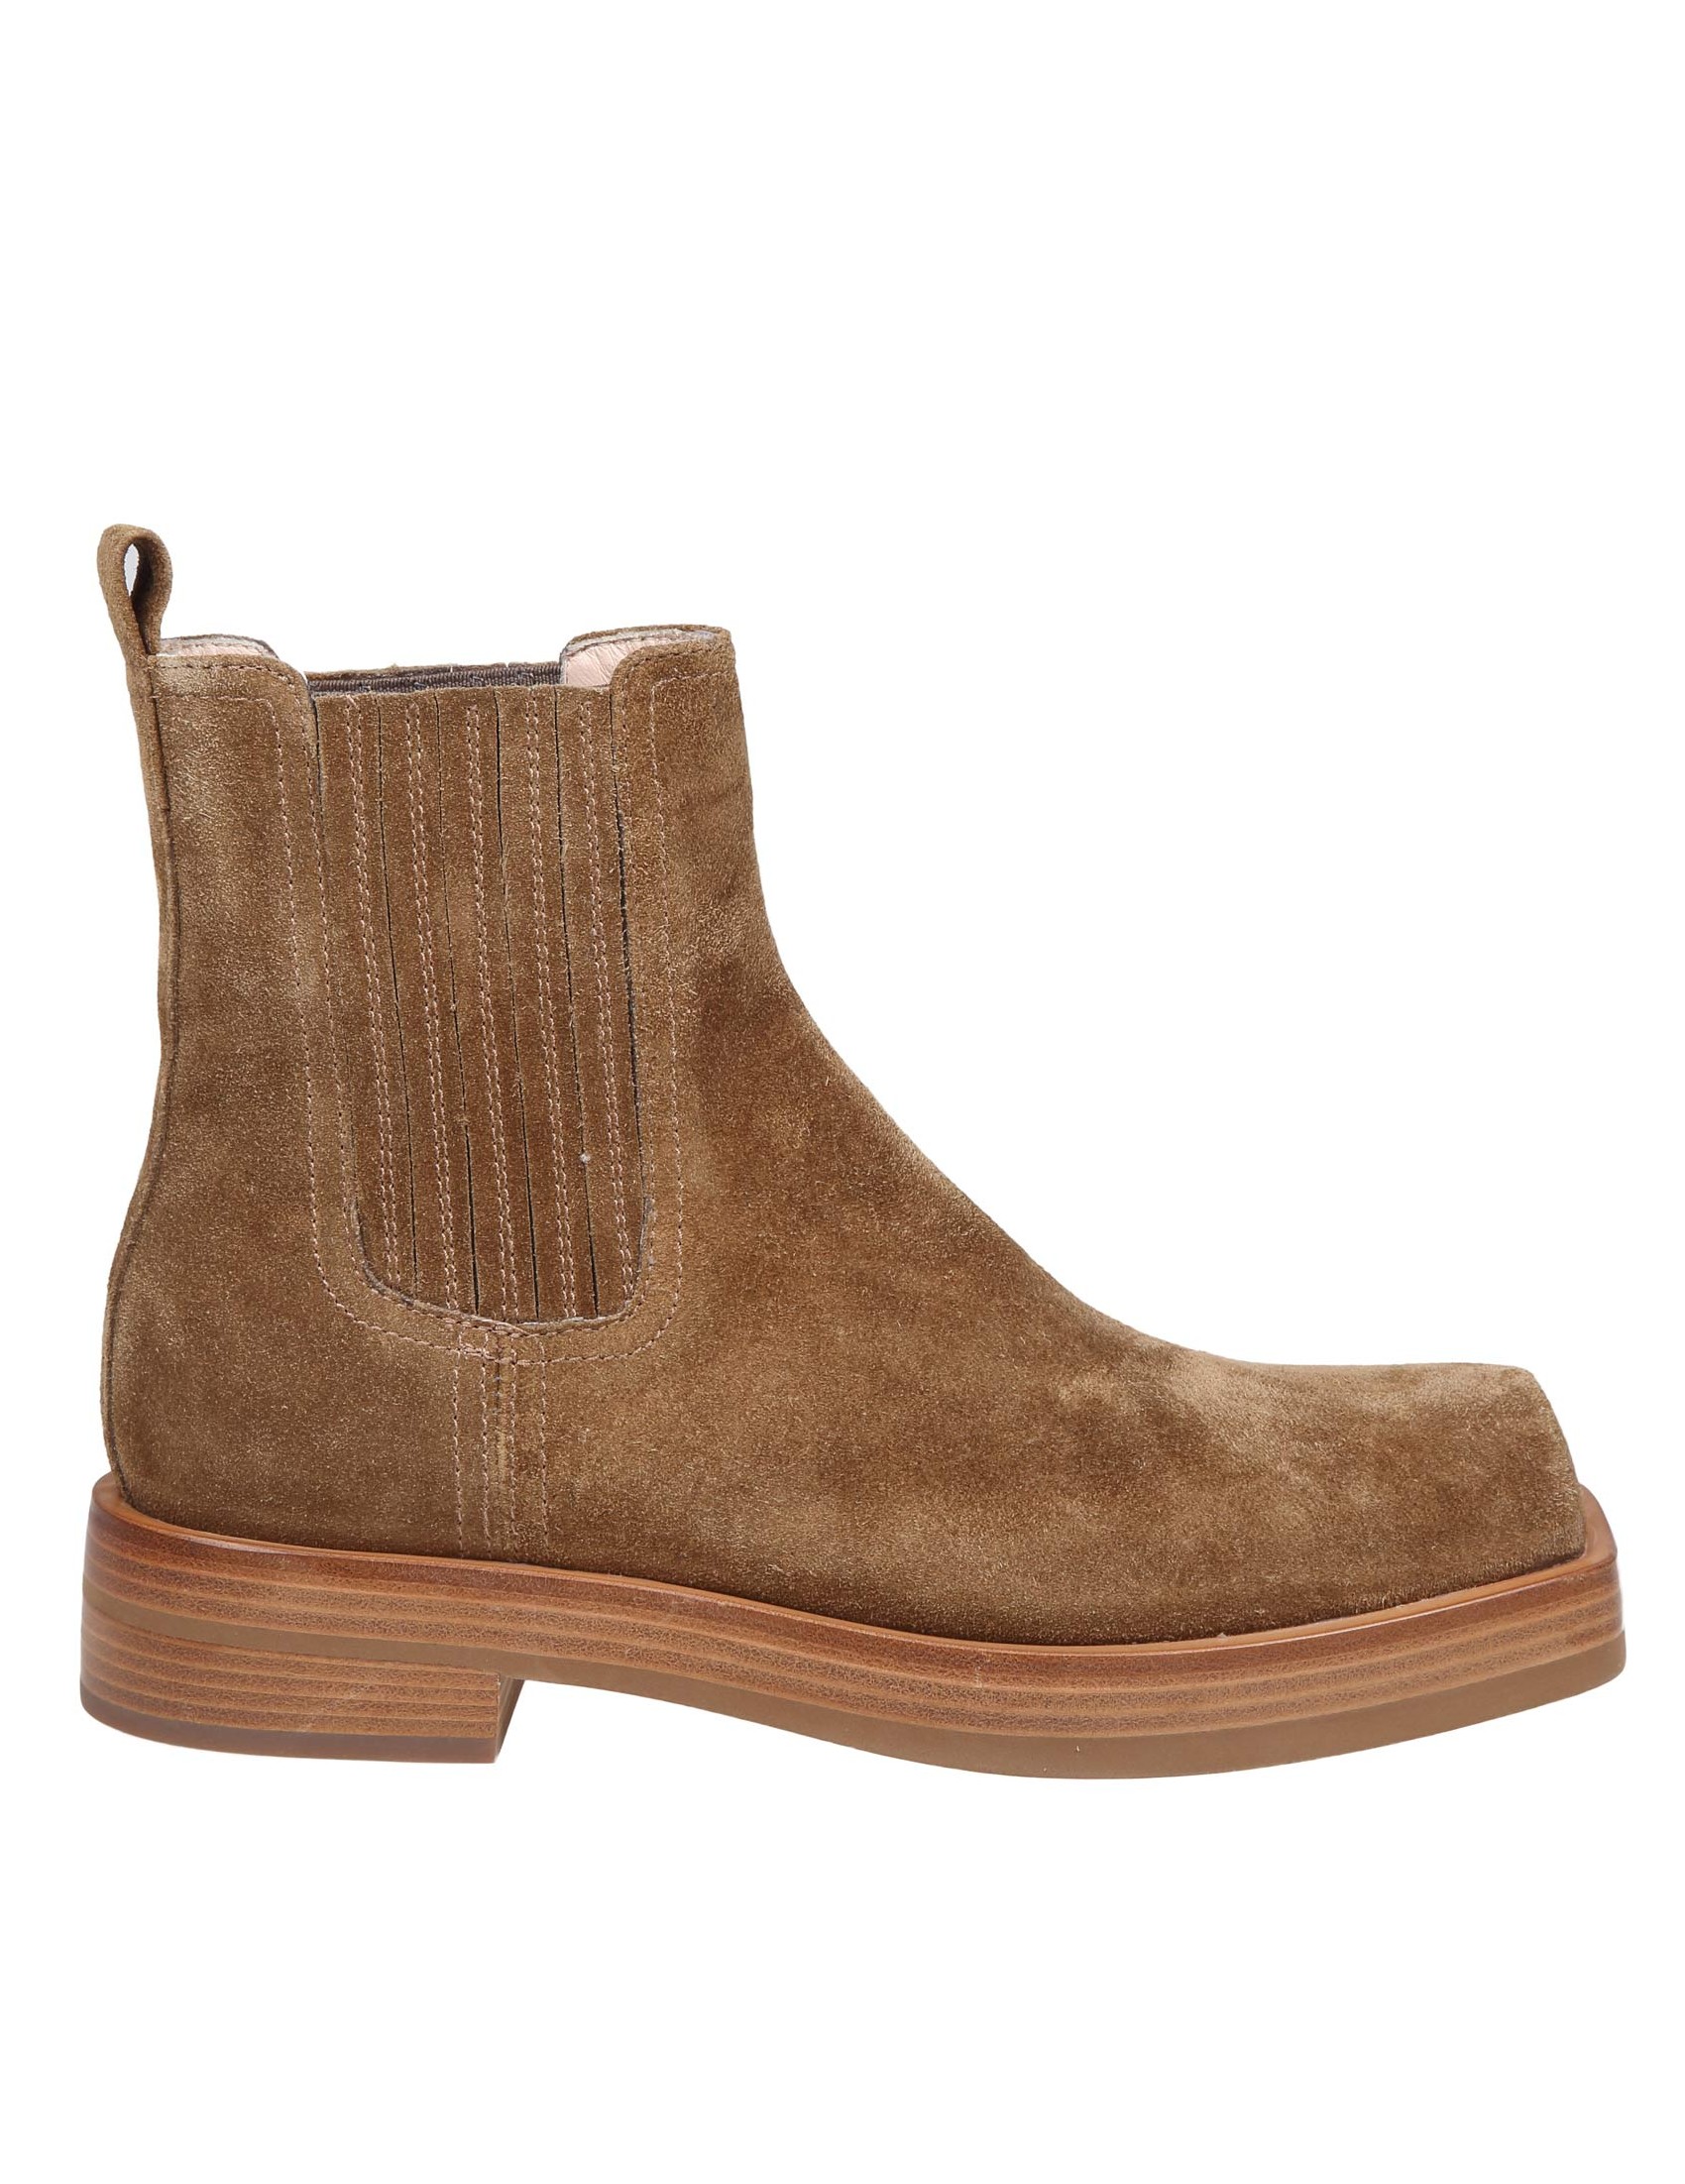 AGL RINA ANKLE BOOTS IN CAMEL COLOR SUEDE